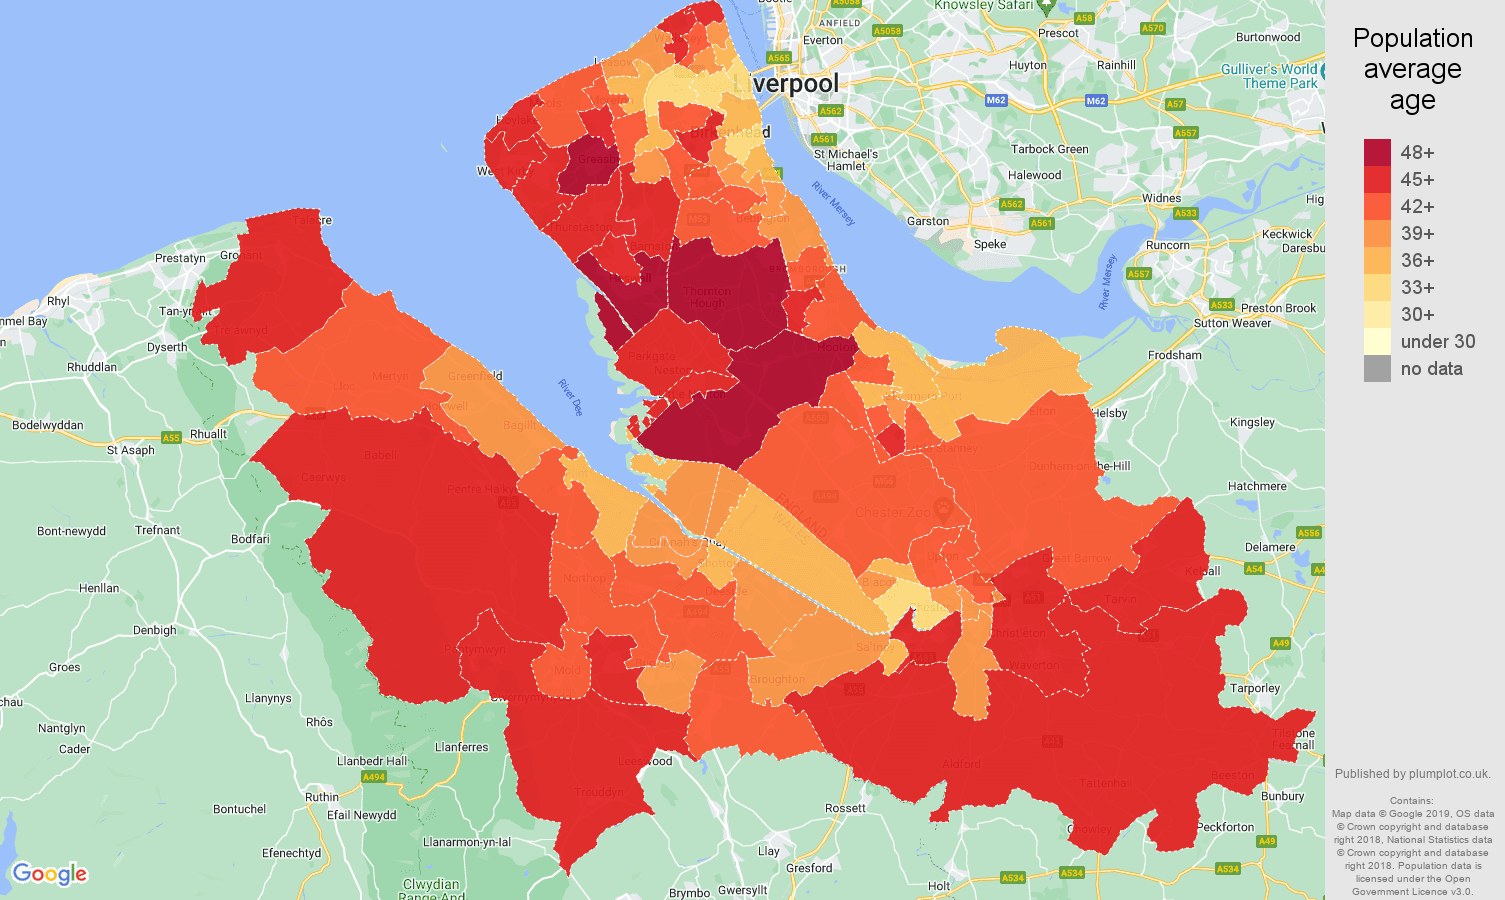 Chester population average age map